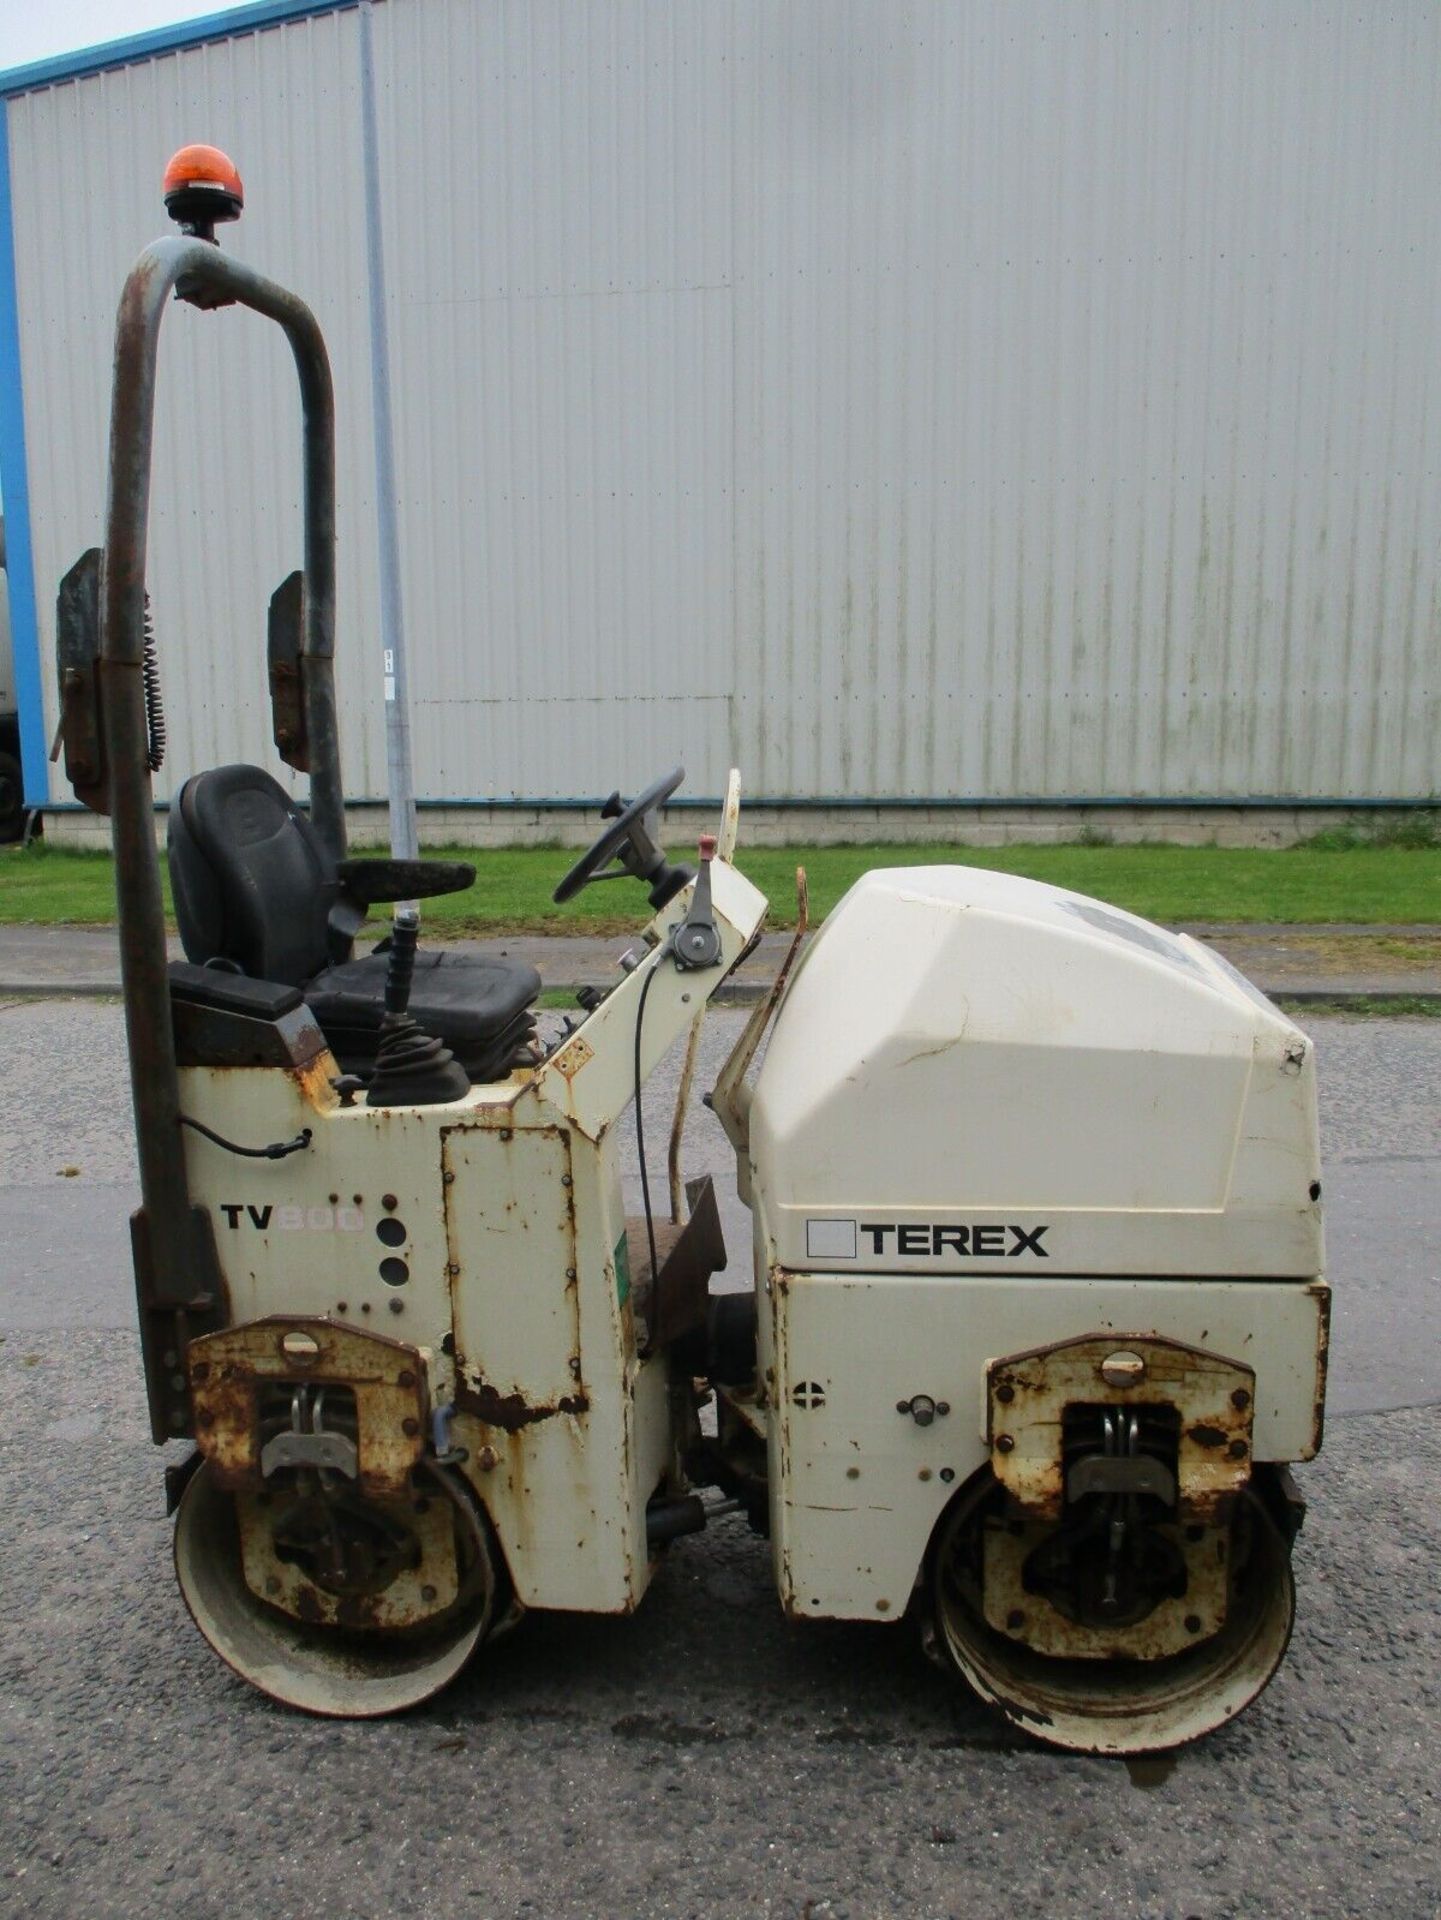 2008 TEREX TV800 : ELECTRIC START DIESEL EXCELLENCE - Image 2 of 10